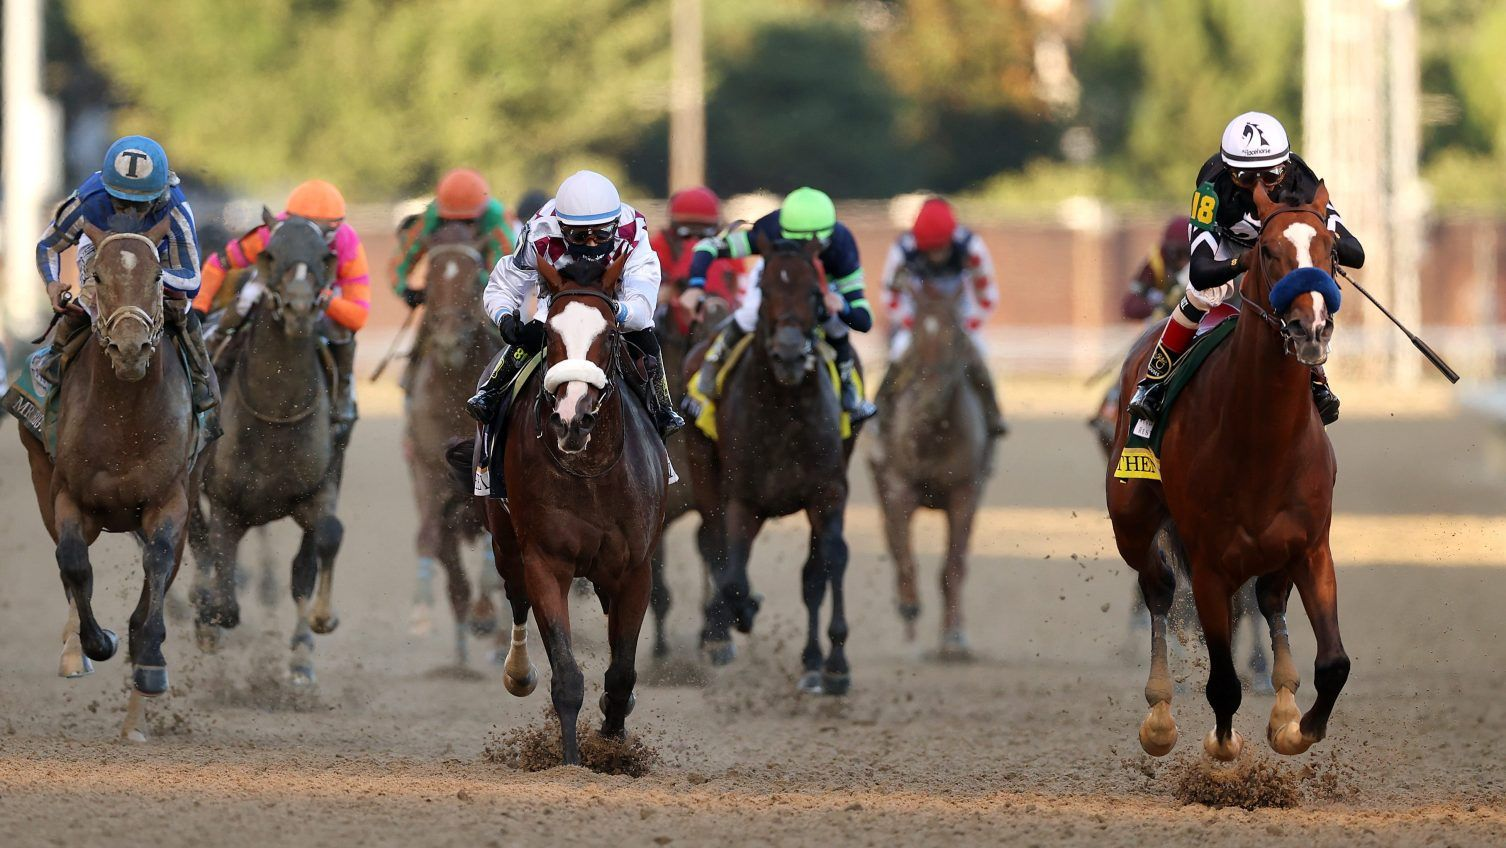 Authentic wins 2020 Kentucky Derby, ends Tiz the Law’s Triple Crown hopes